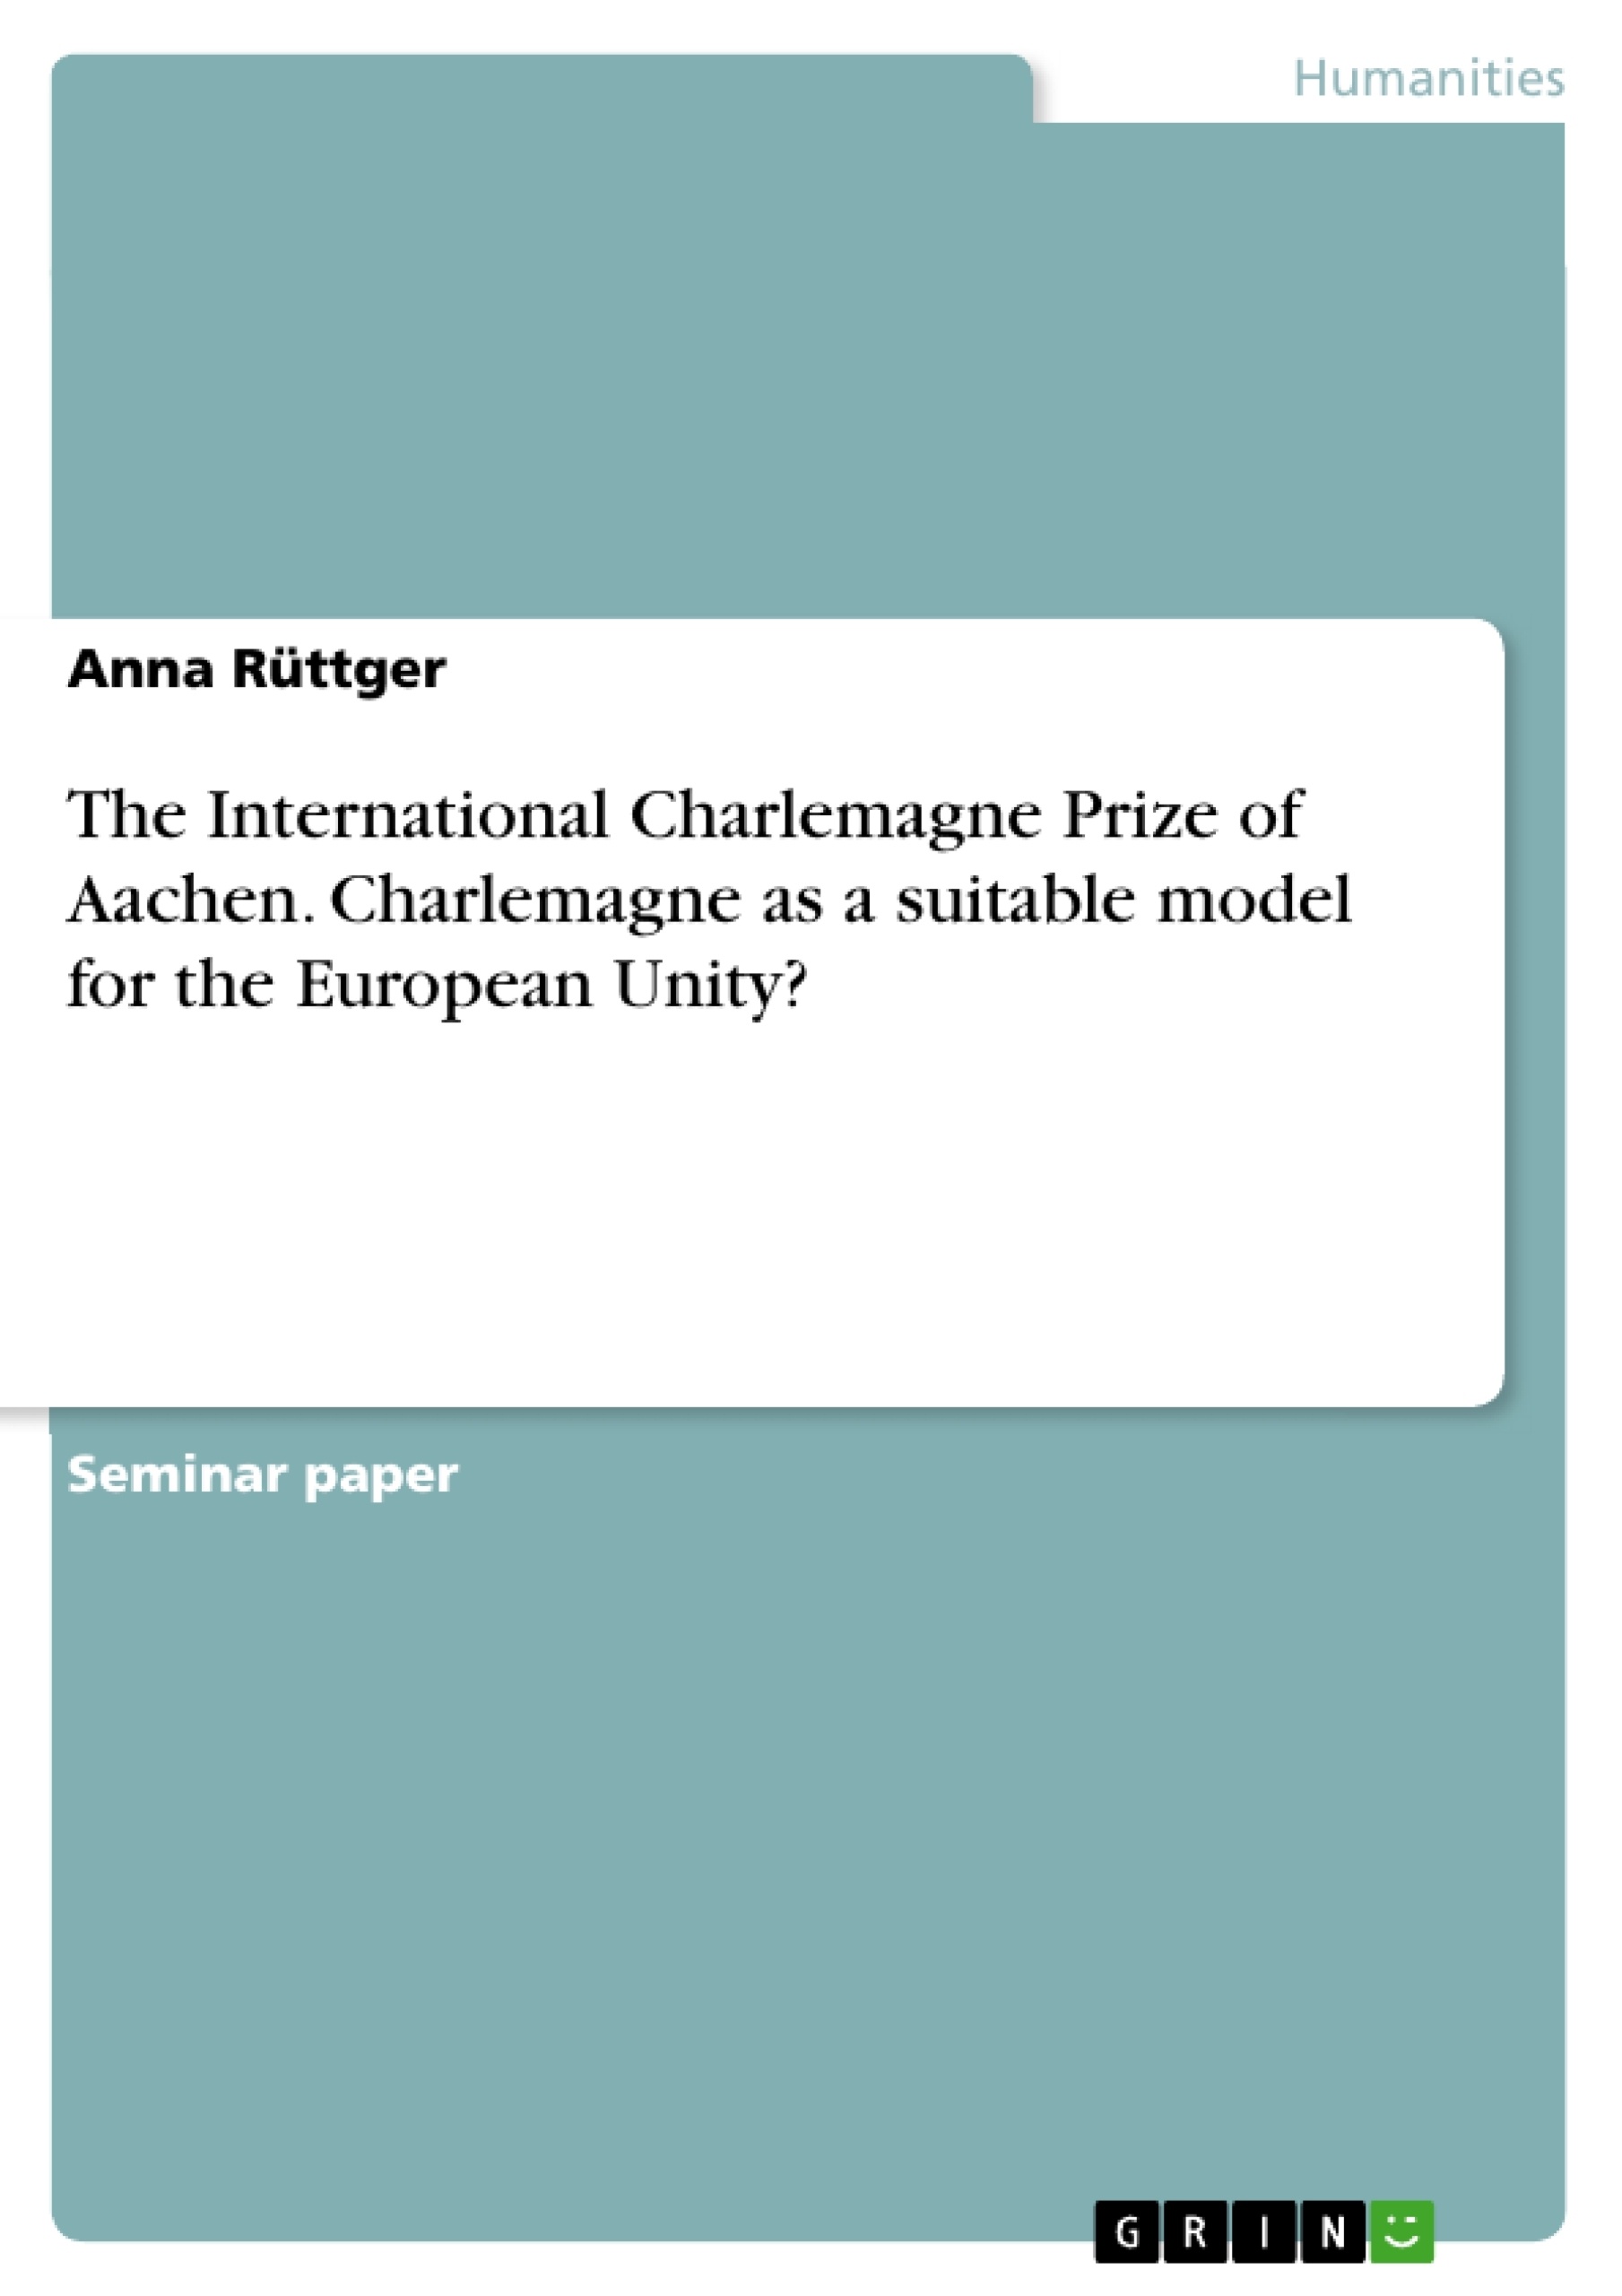 Título: The International Charlemagne Prize of Aachen. Charlemagne as a suitable model for the European Unity?